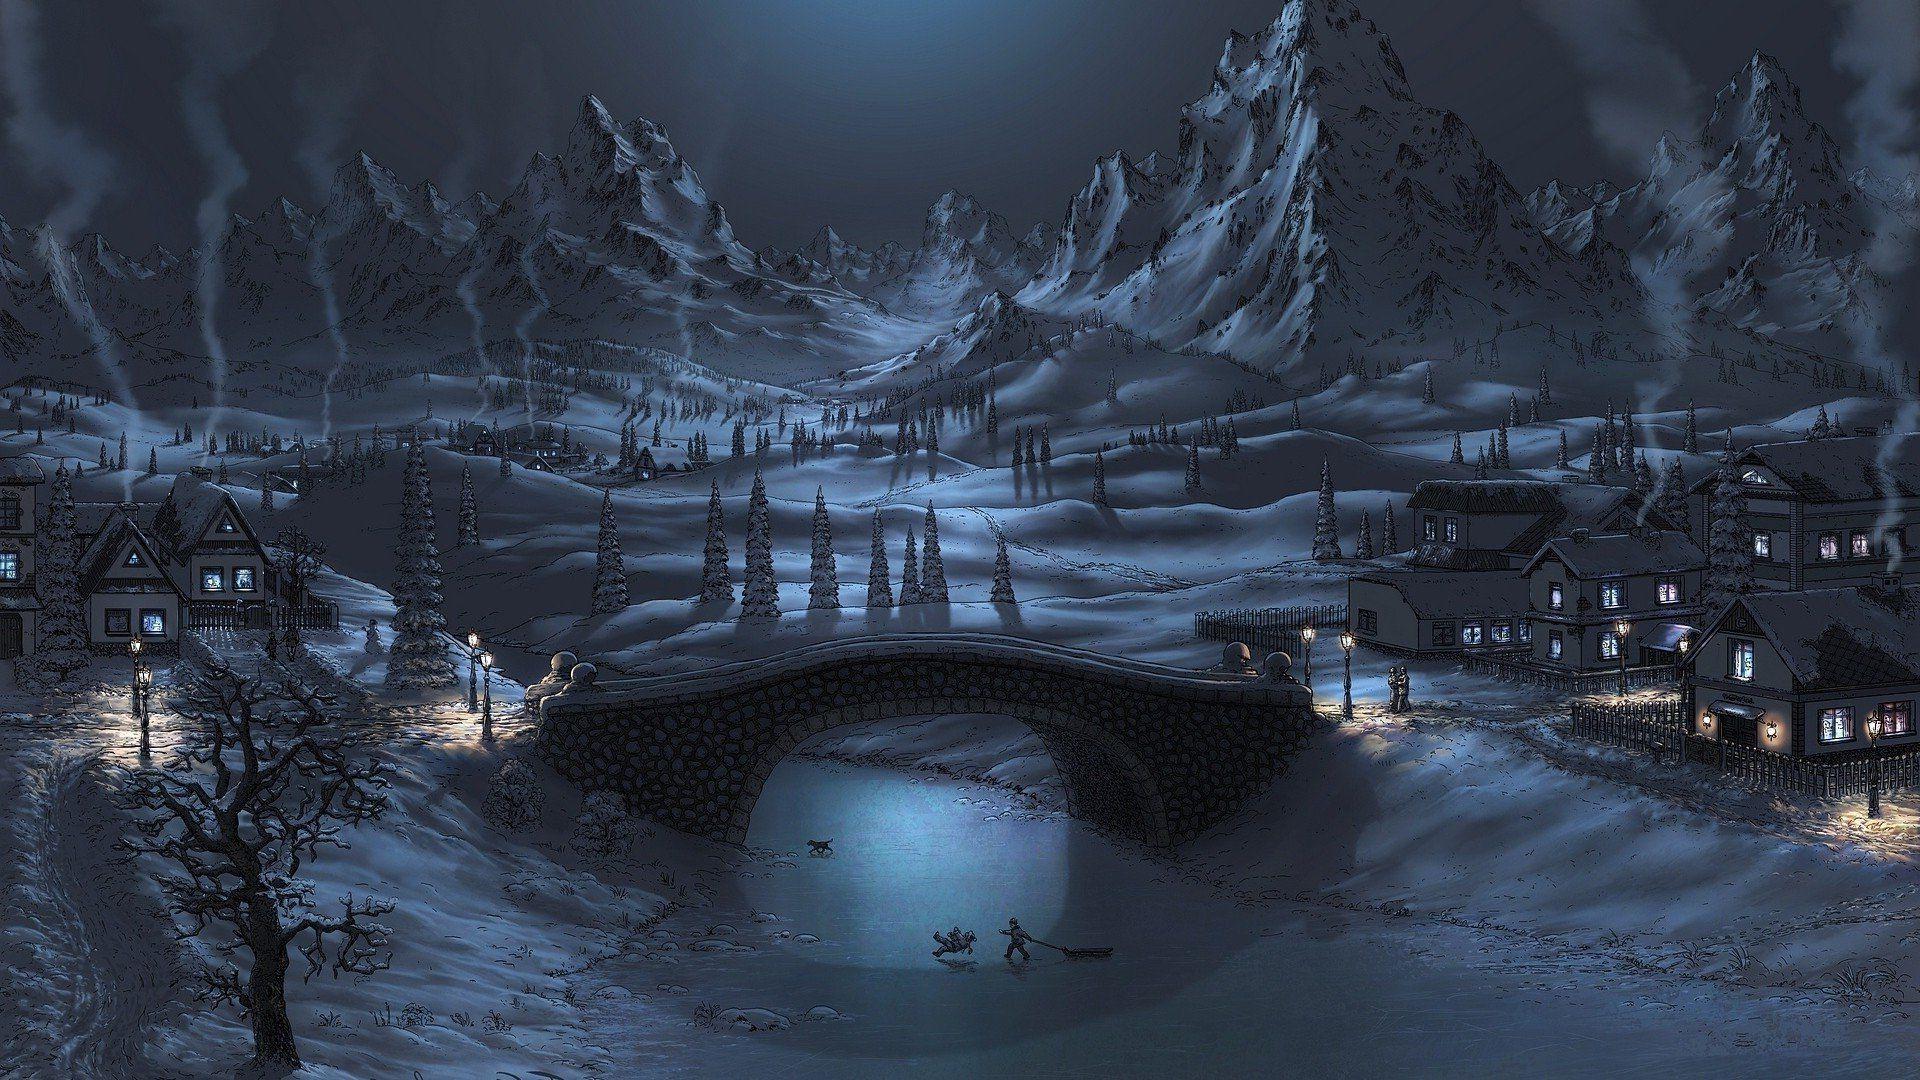 Winter is coming in the valley. Wallpaper background. Winter wallpaper, Good night wallpaper, Winter night